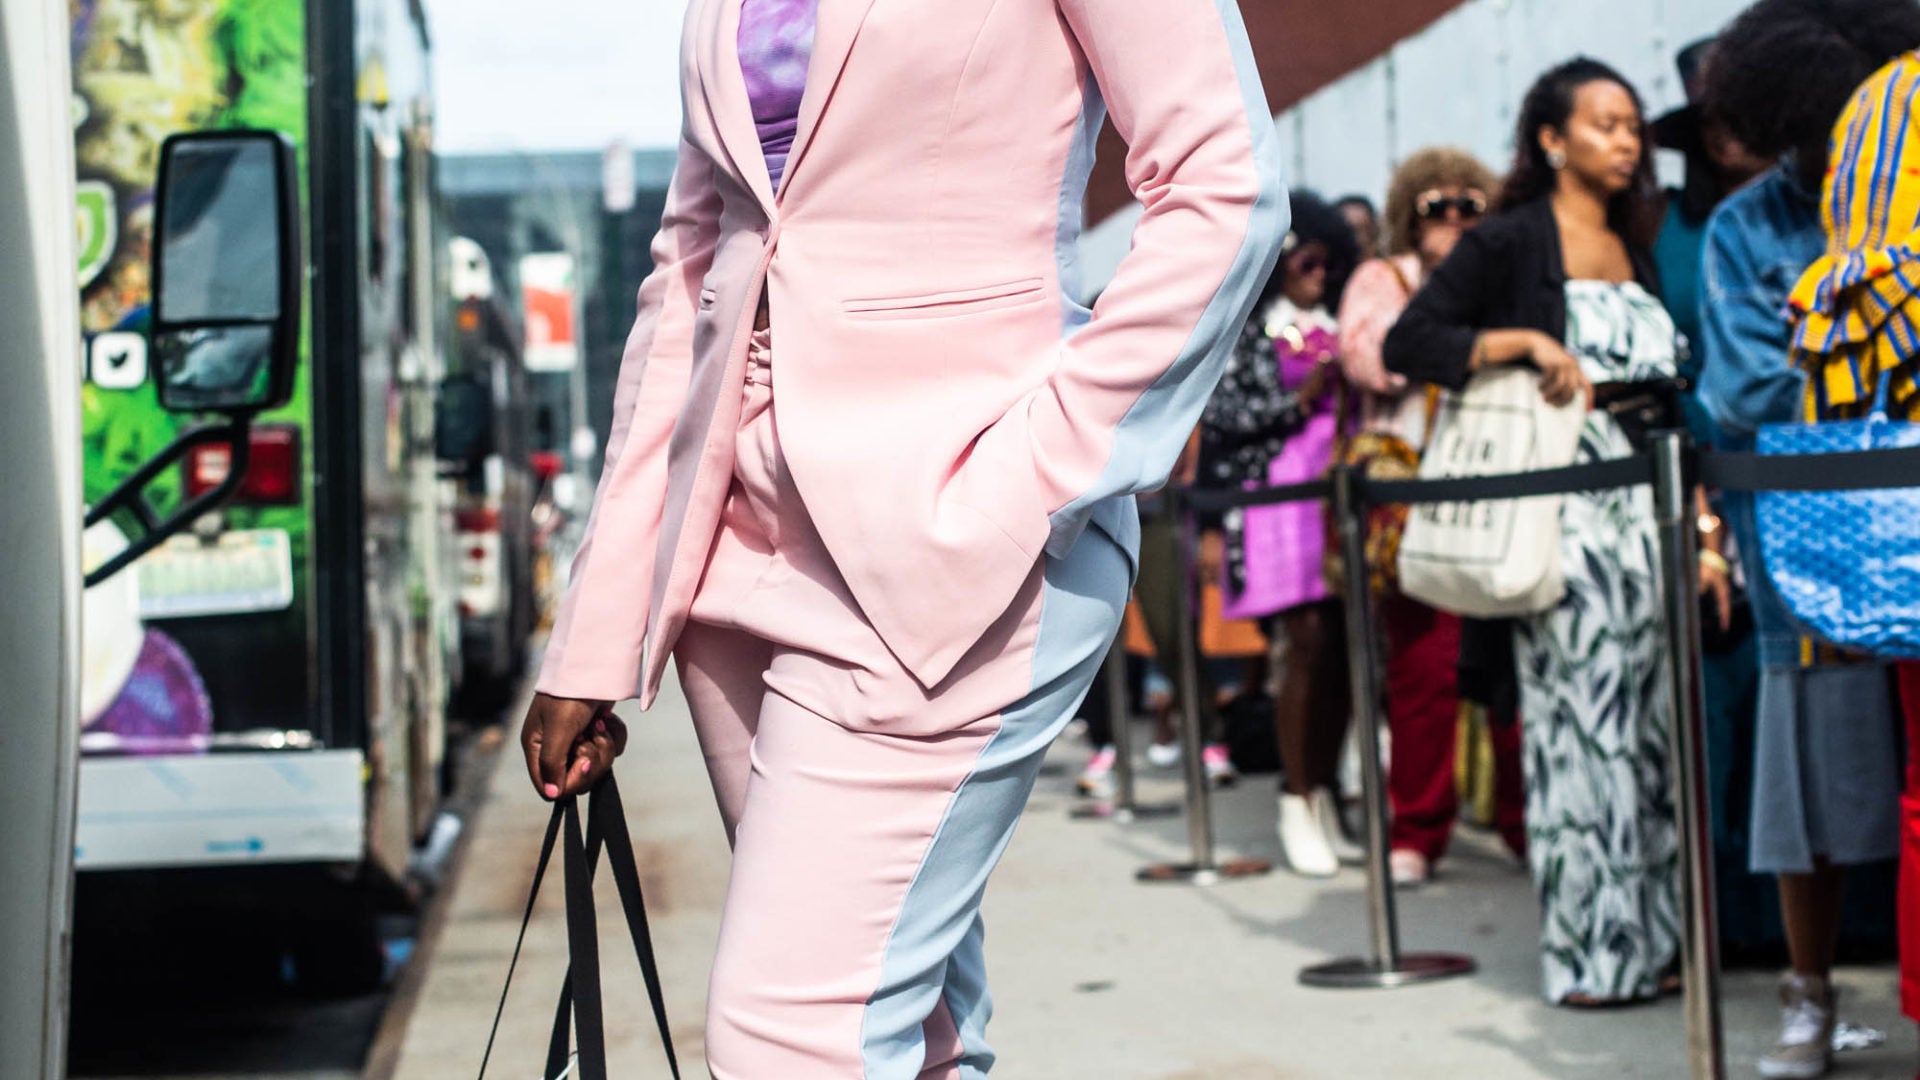 The Street Style At ESSENCE Fashion House NYC Was On Fire